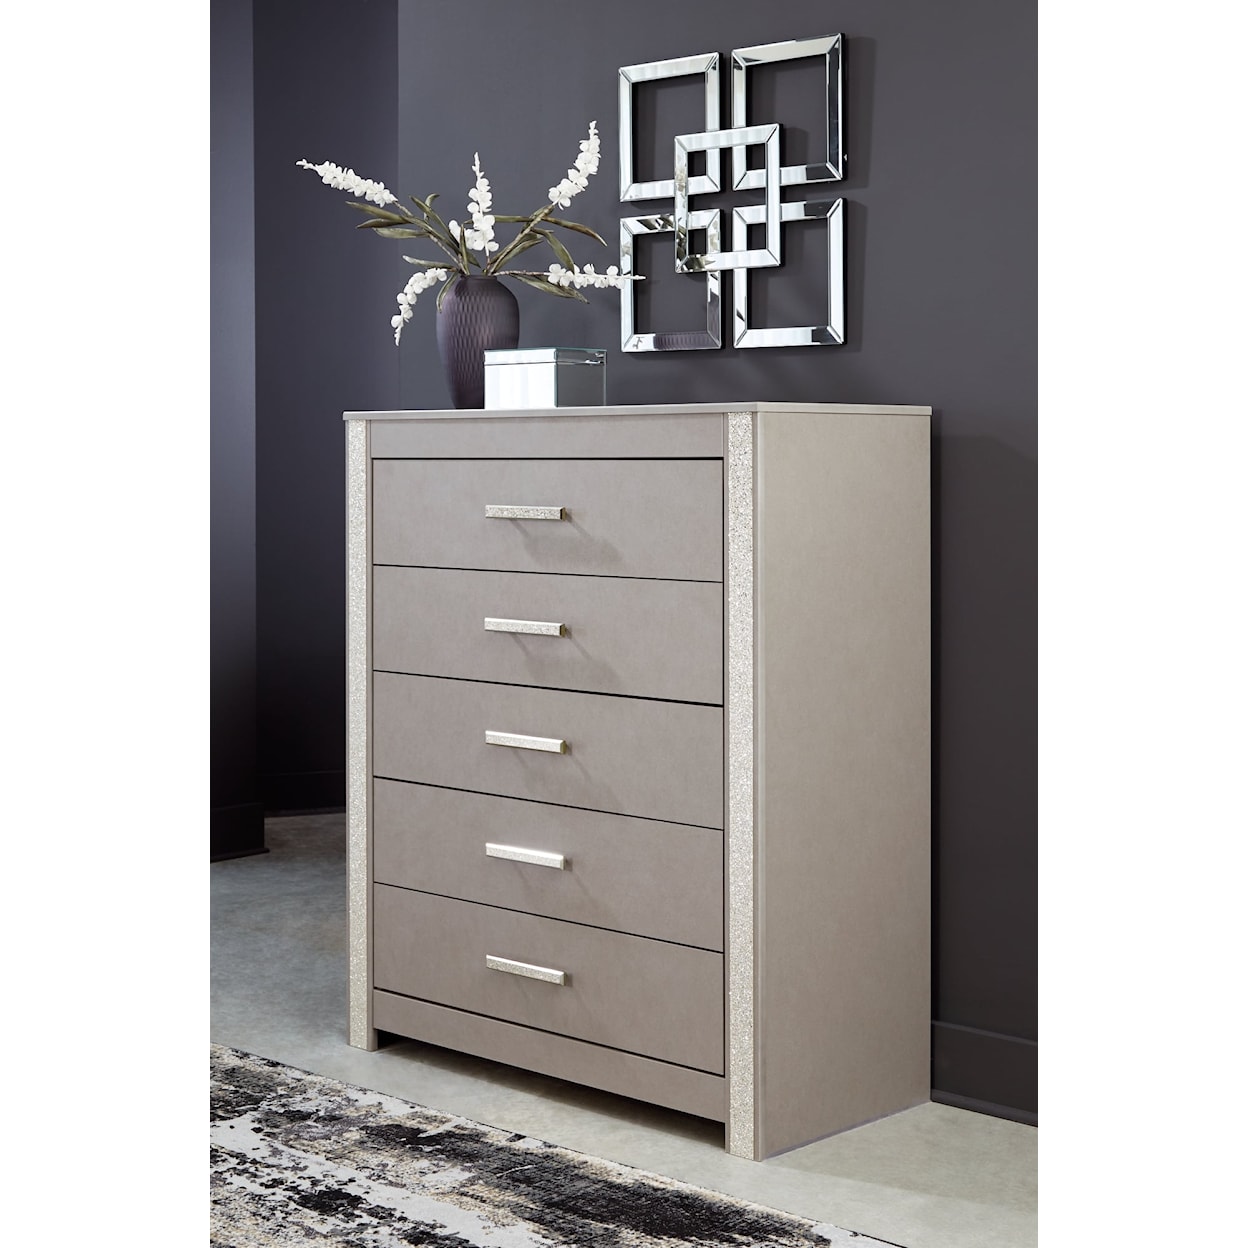 Signature Design by Ashley Surancha Bedroom Chest